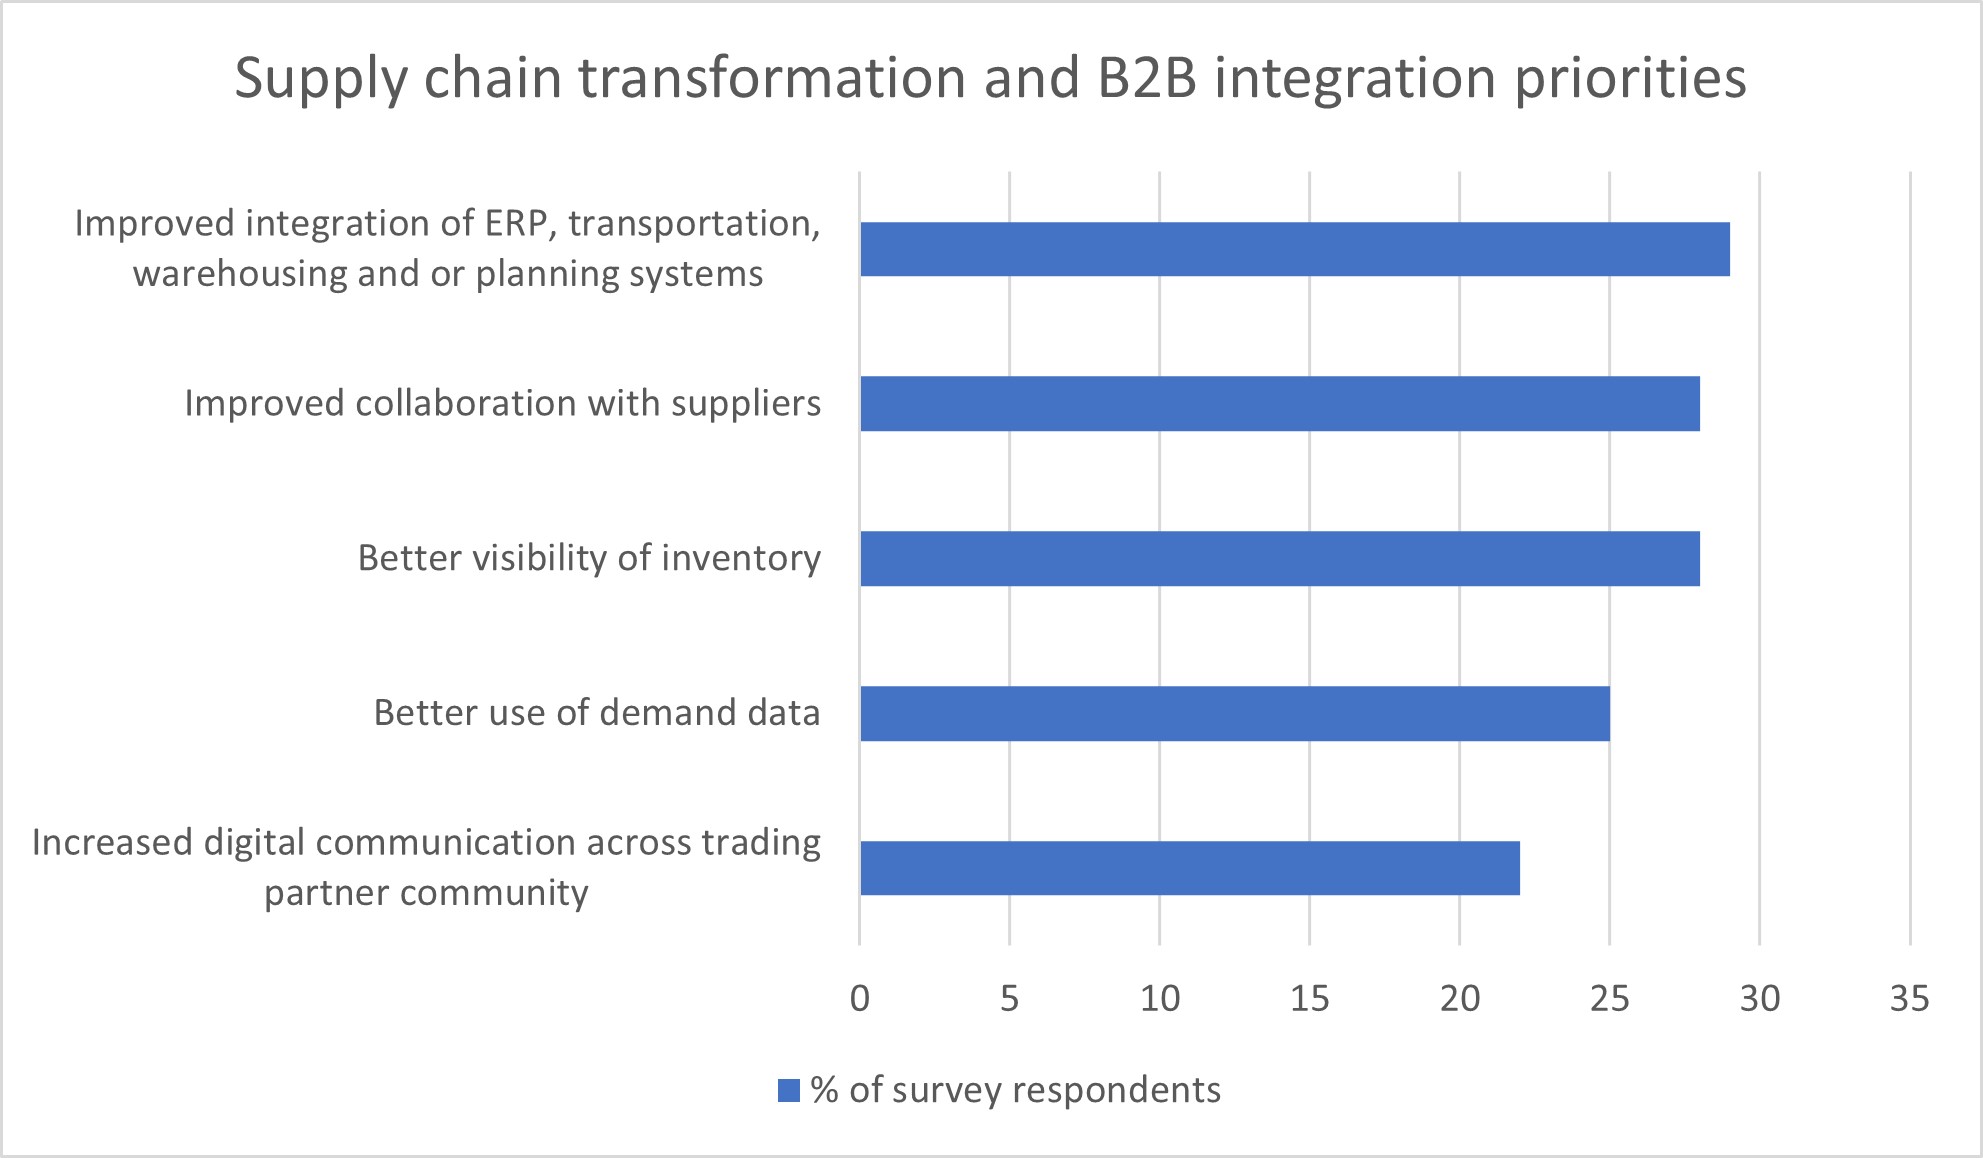 Image of the ICD report survey results with supply chain transformation and B2B integration priorities. Improved integration and systems and collaboration are among the most critical priorities. 